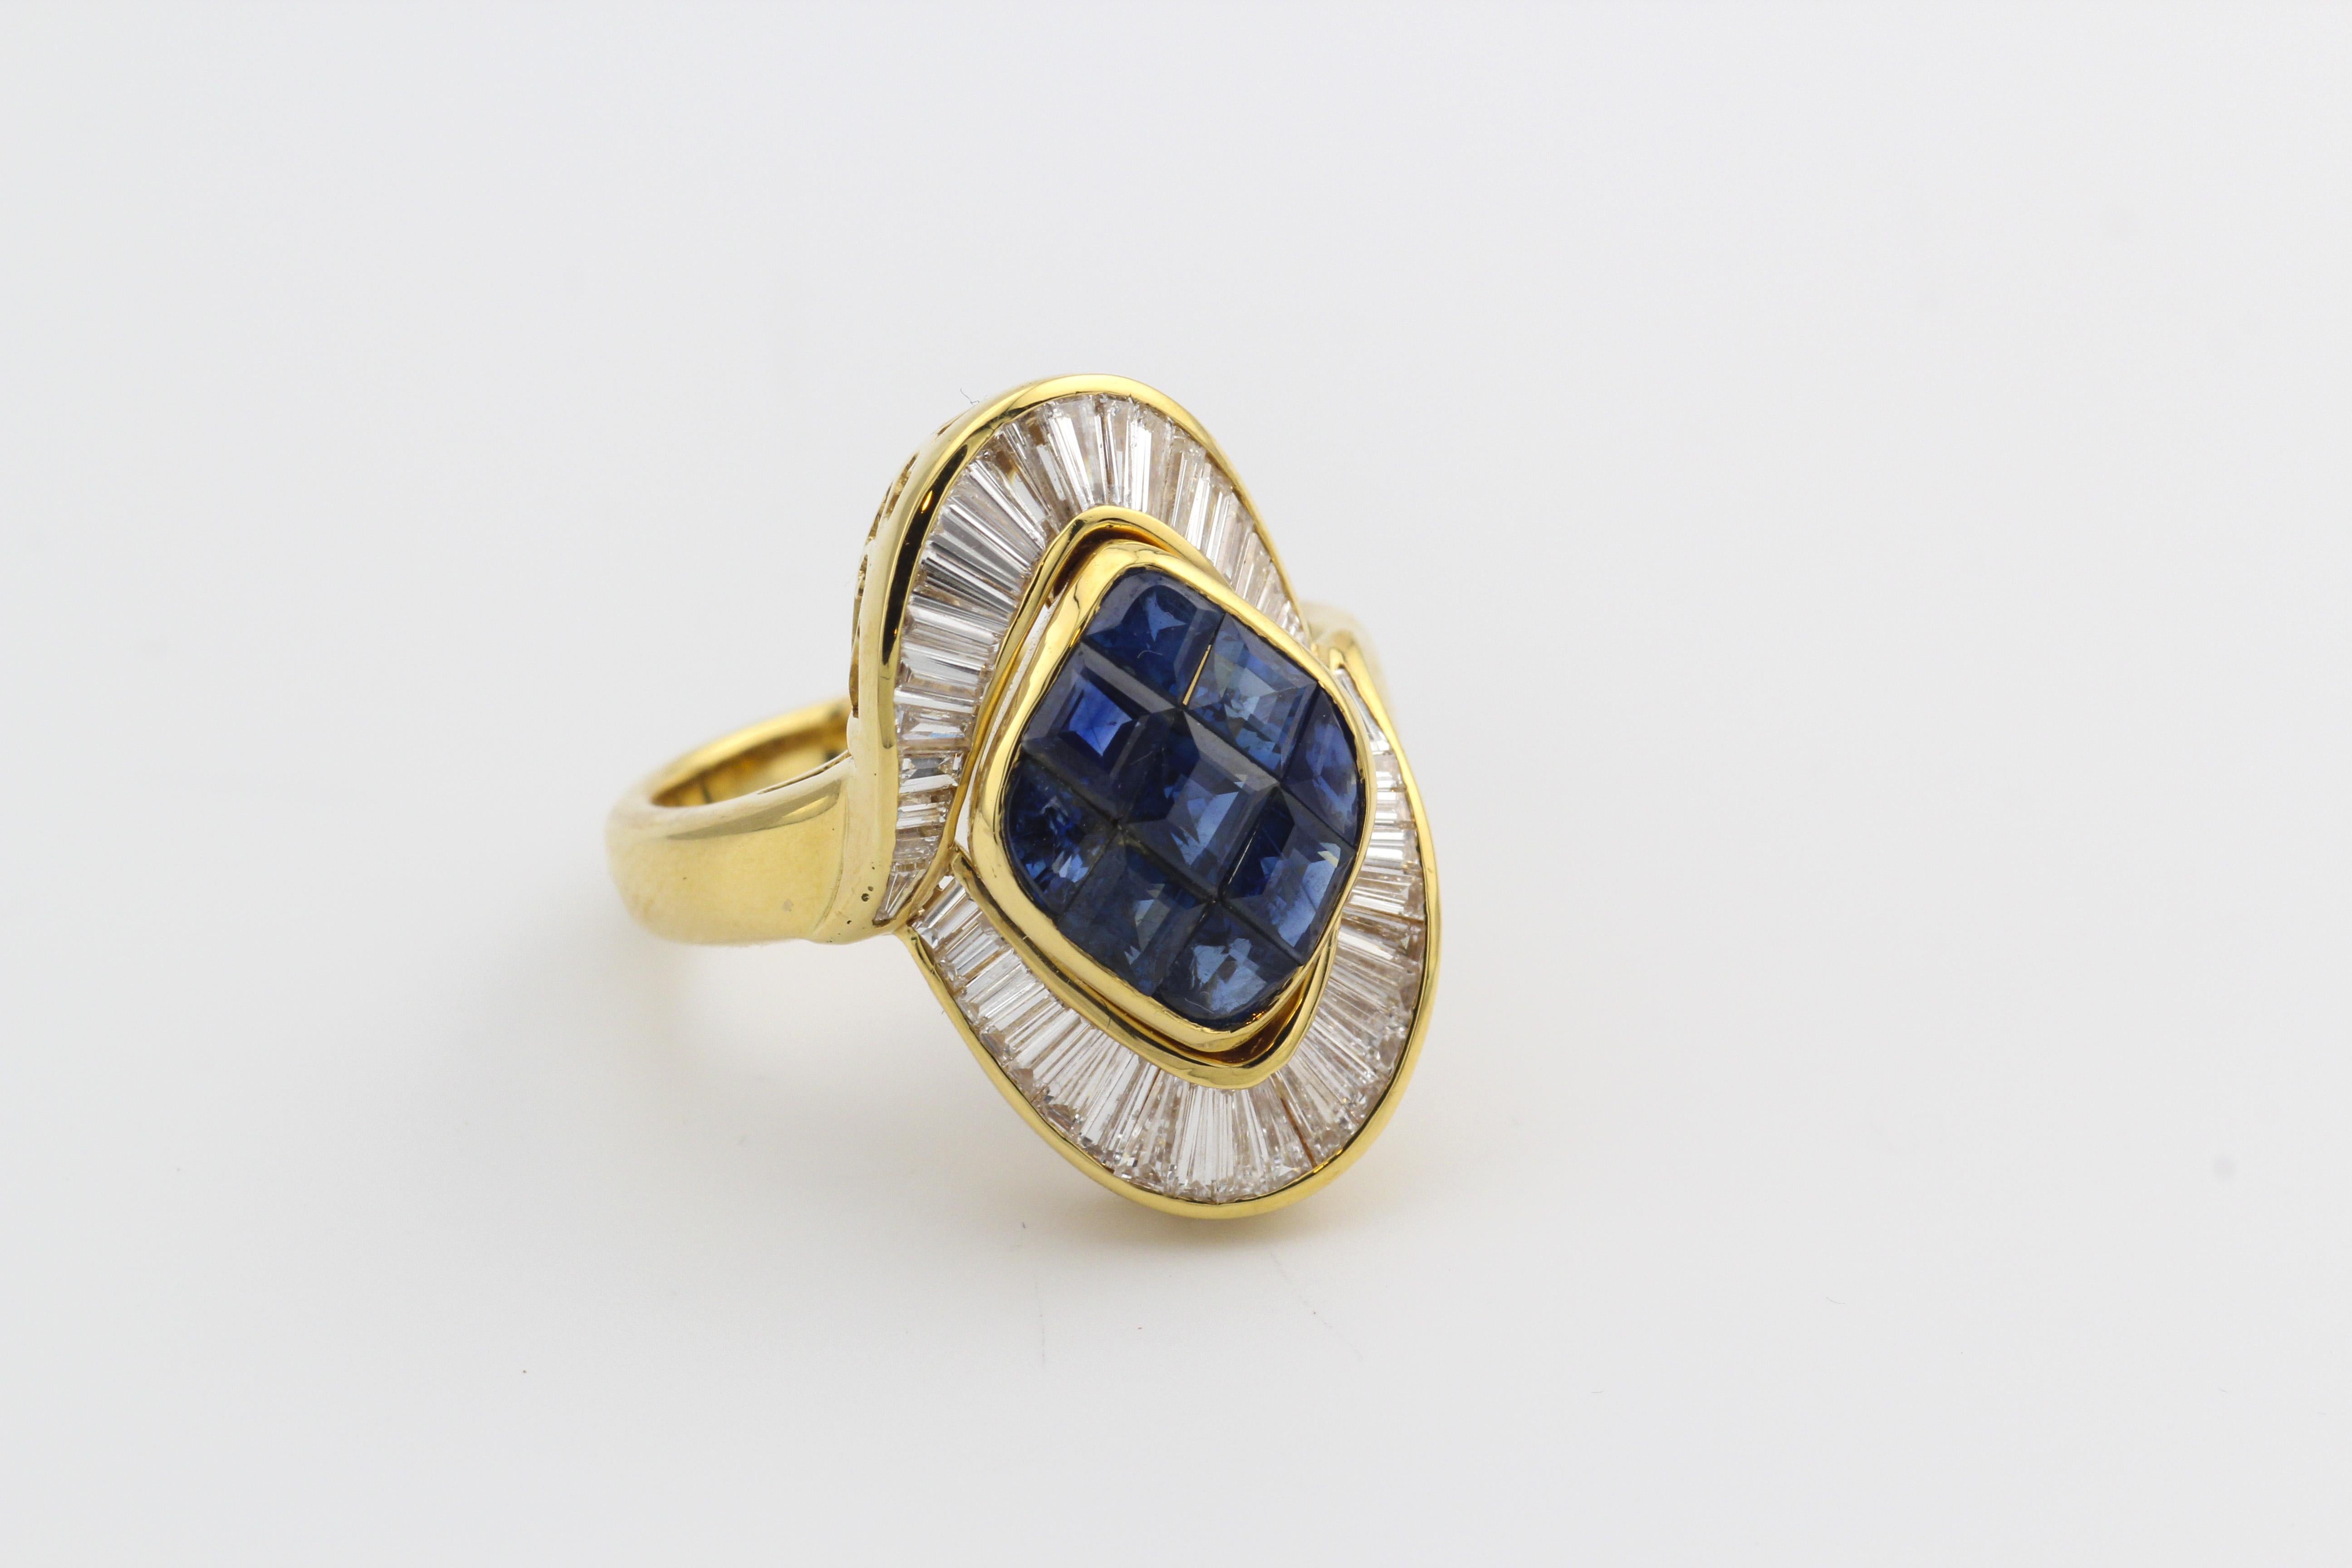 Contemporary Mouawad Mystery Set Sapphire Diamond 18k Yellow Gold Ring Size 6.75 For Sale